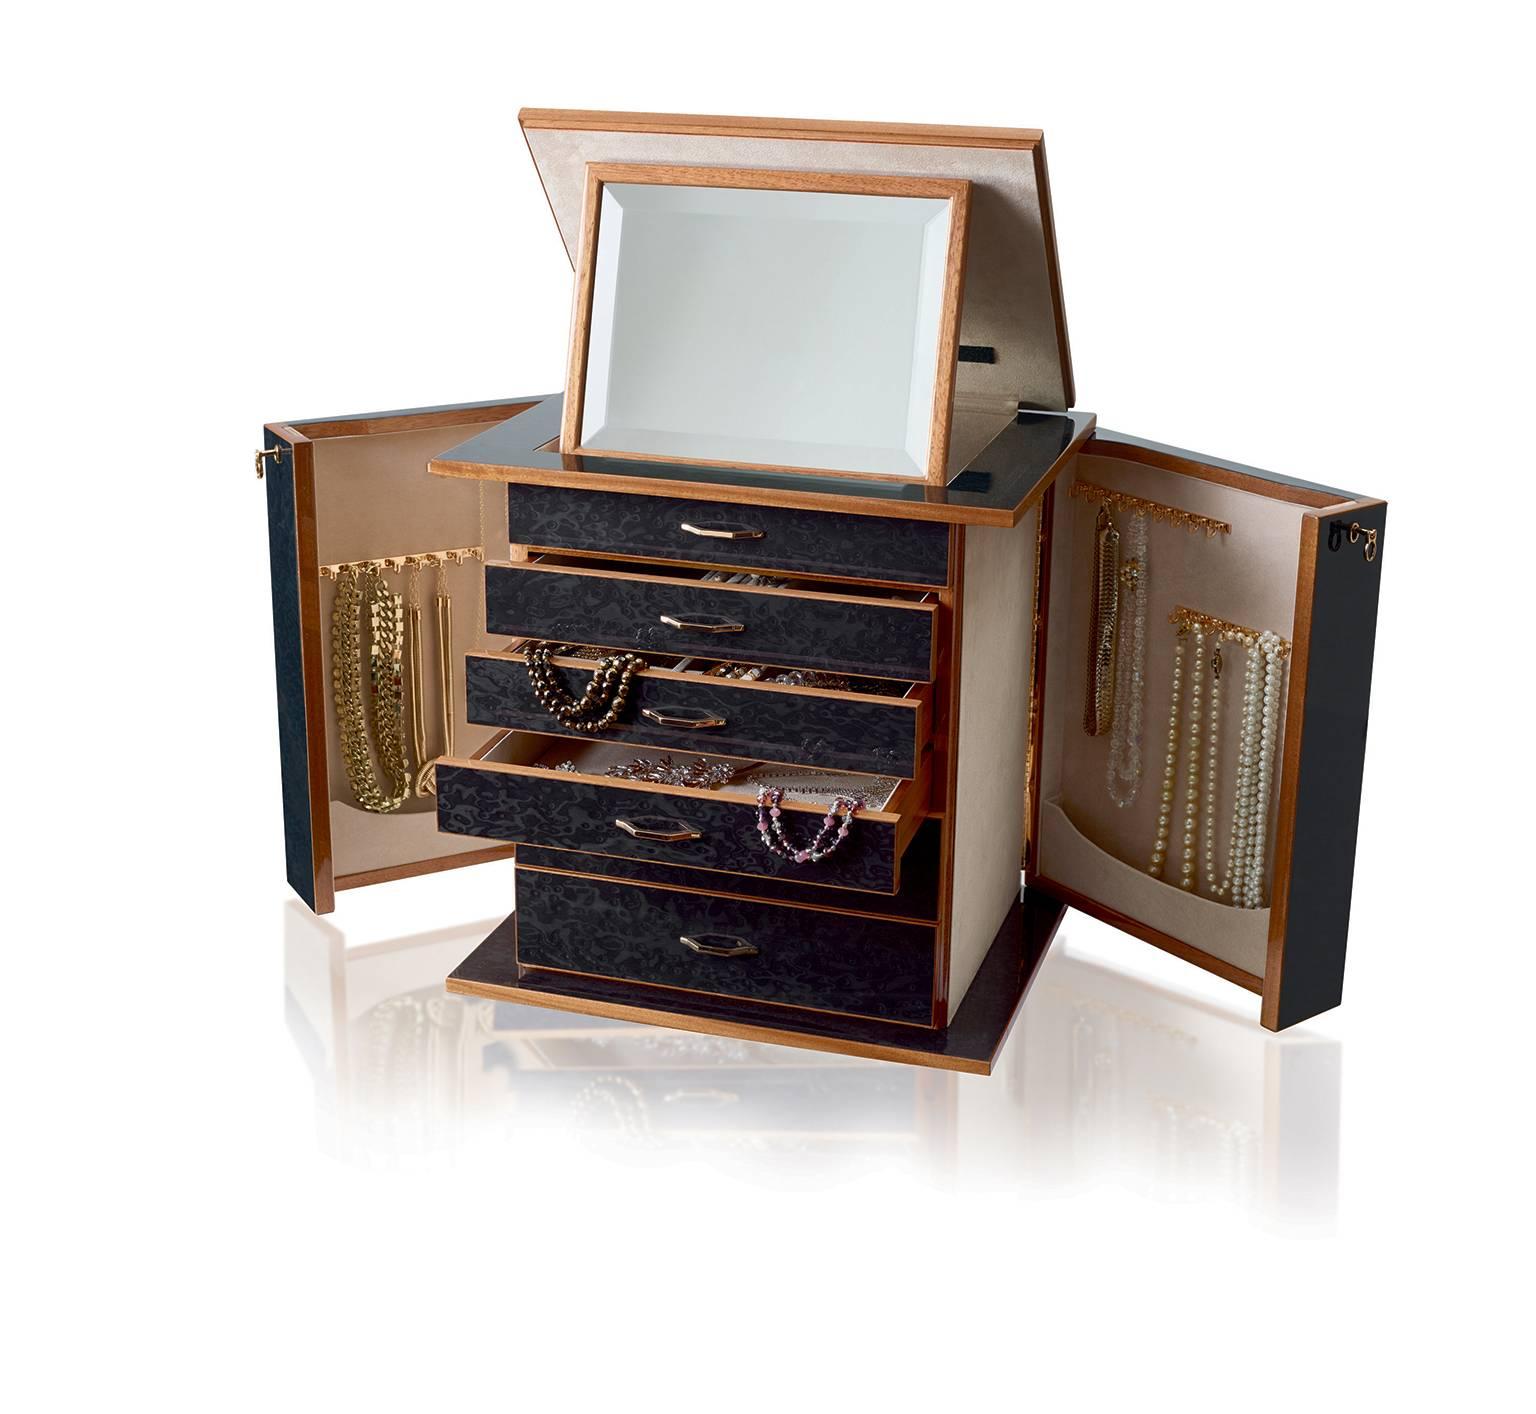 Jewelry chest in polished black bird’s-eye maple and mahogany, ultra suede lining, 24-karat gold-plated brass accessories. With necklace bars, lockable doors and five drawers. Adjustable mirror on the top section.